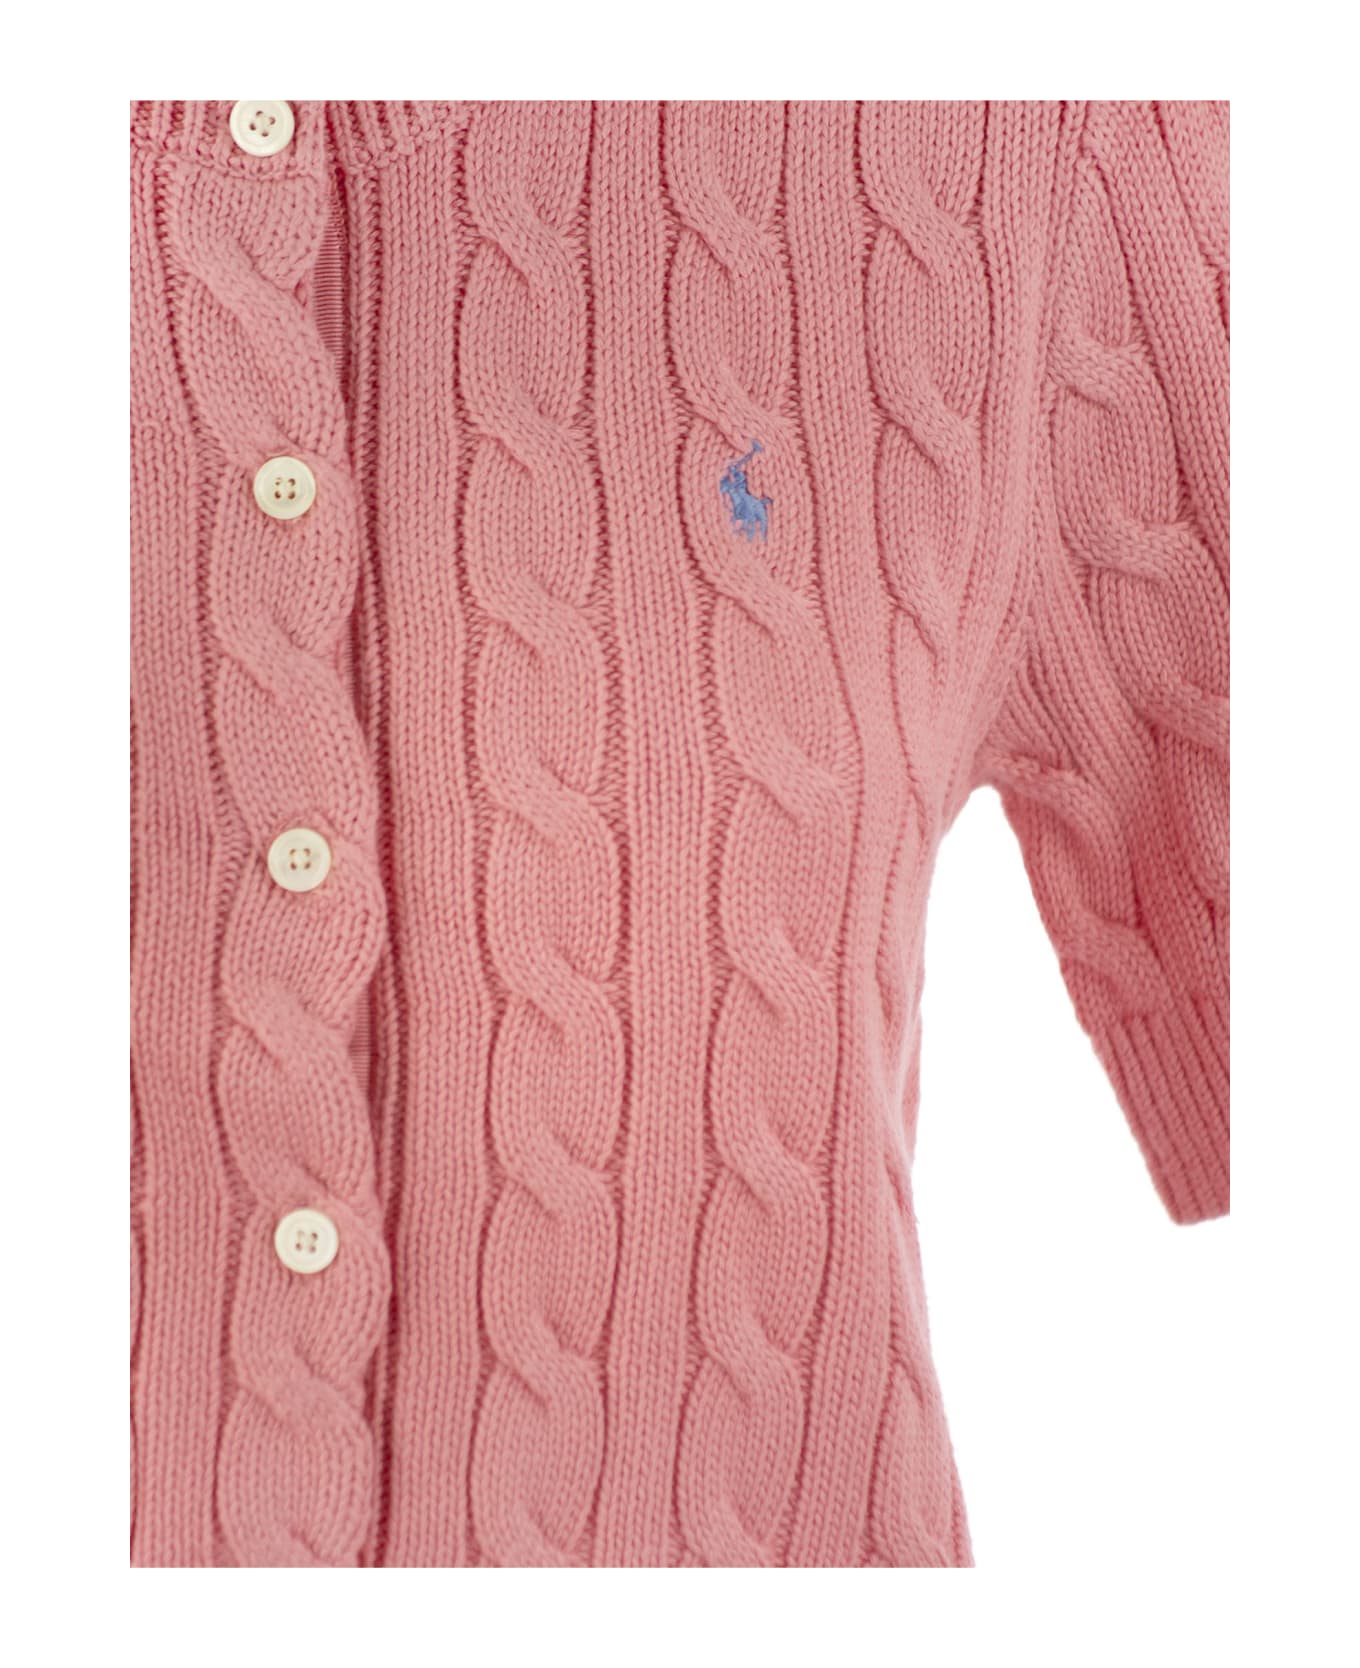 Polo Ralph Lauren Plaited Cardigan With Short Sleeves - Salmon Rose